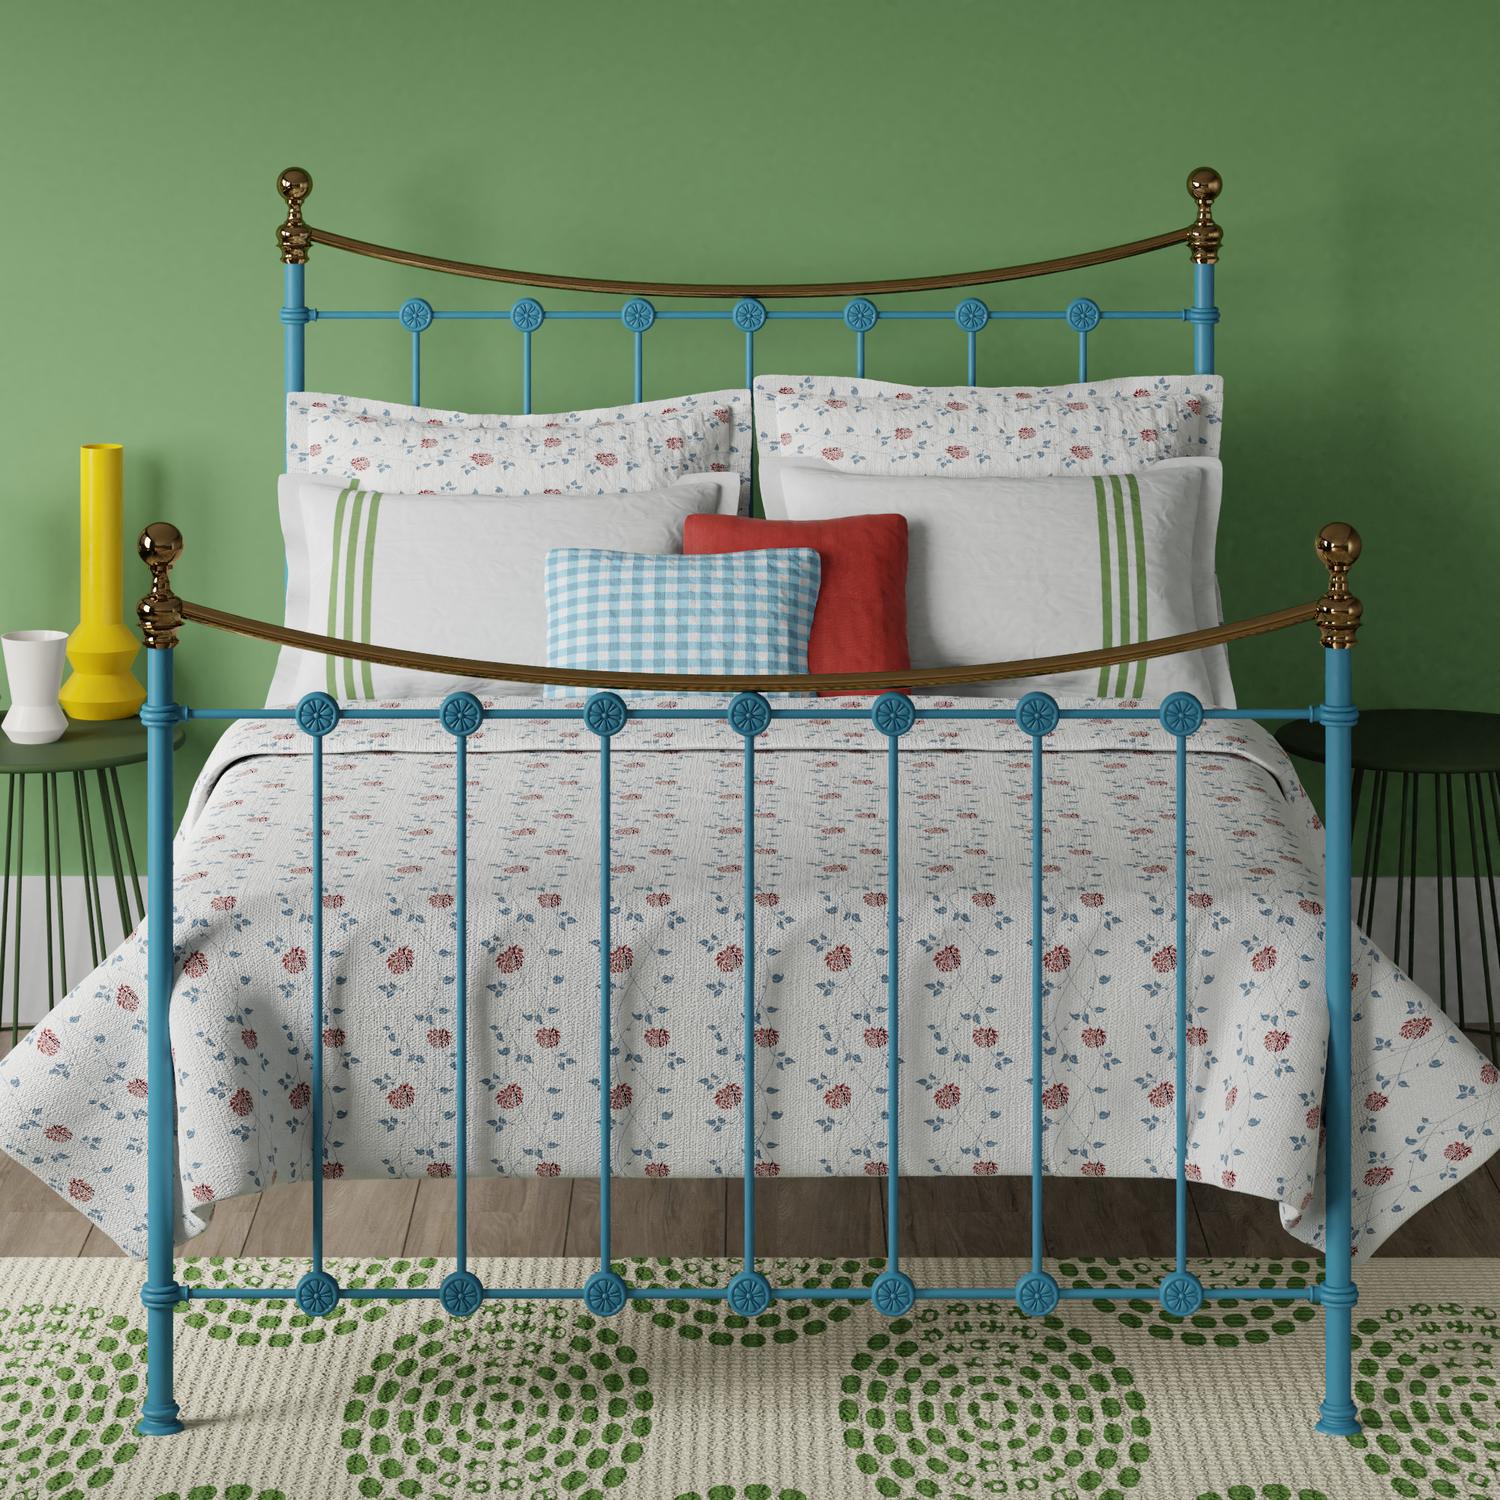 Carrick iron bed - Light blue in a green bedroom